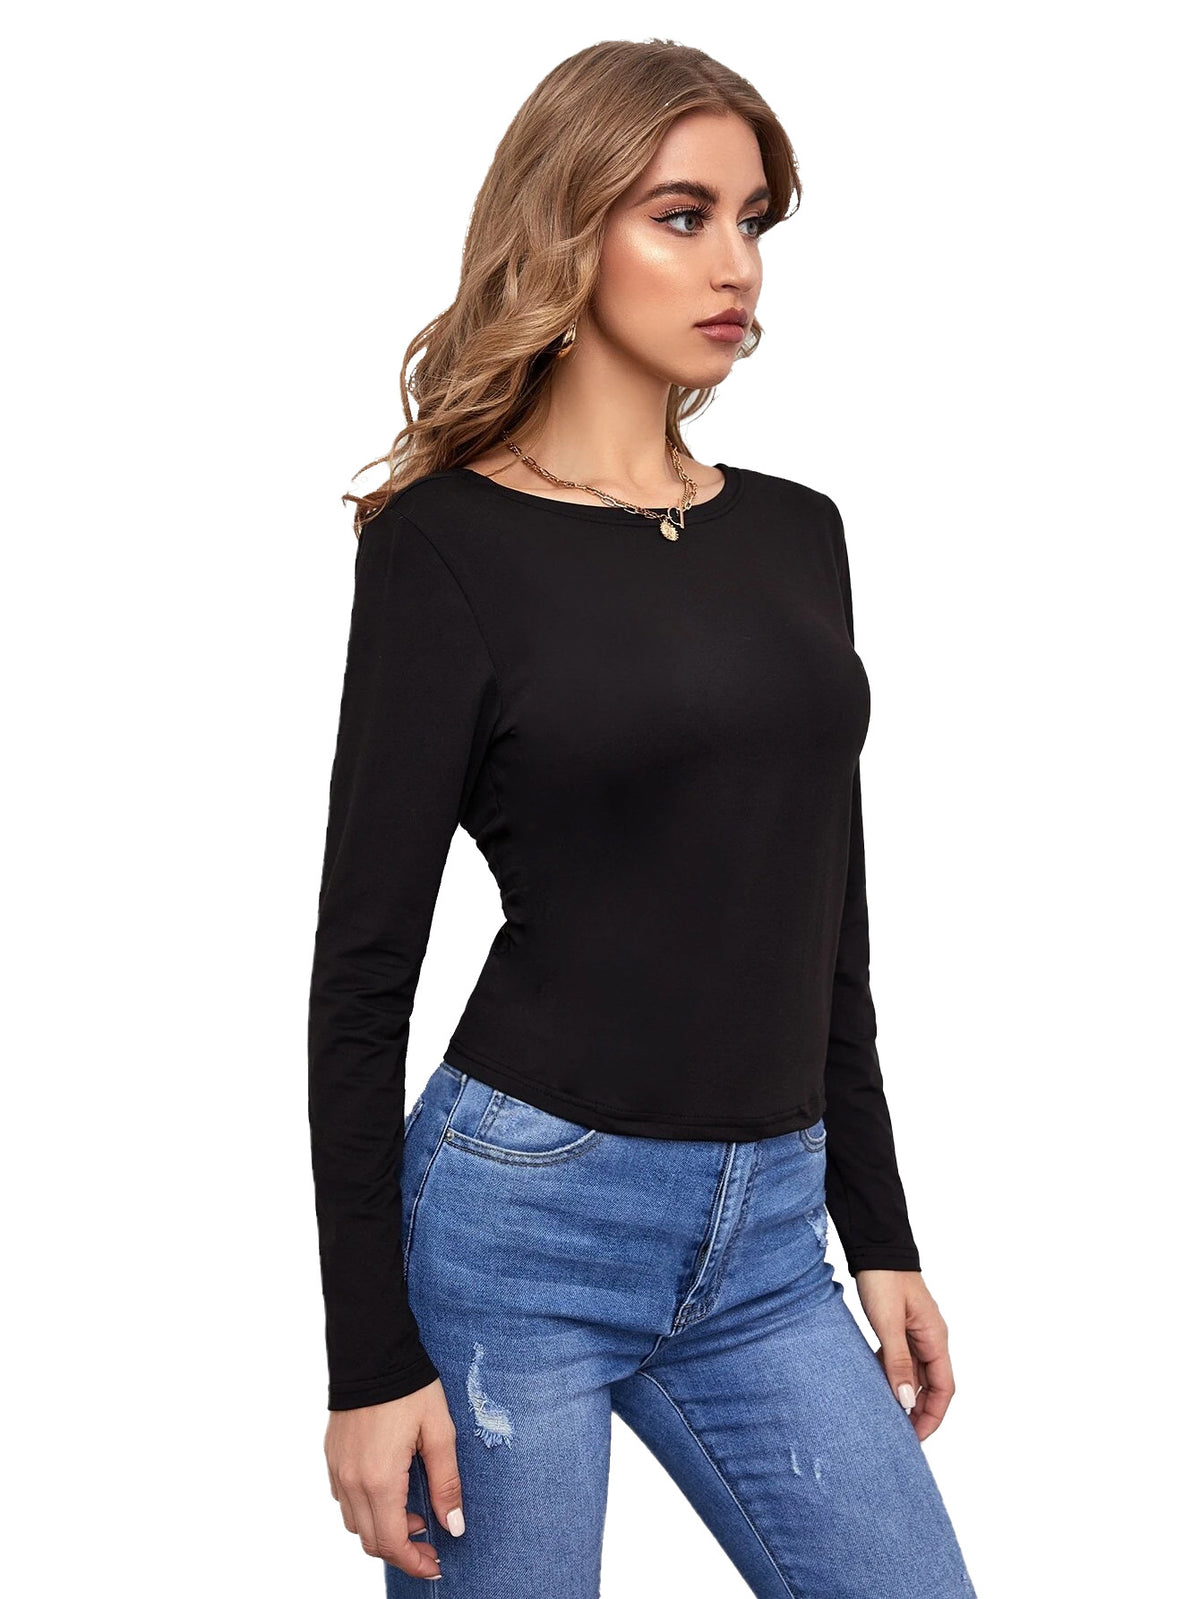 Lace-up T-shirt Beauty Back Triangle Hollow Backless Long Sleeve Running Loose Breathable Workout Clothing Bottoming Blouse